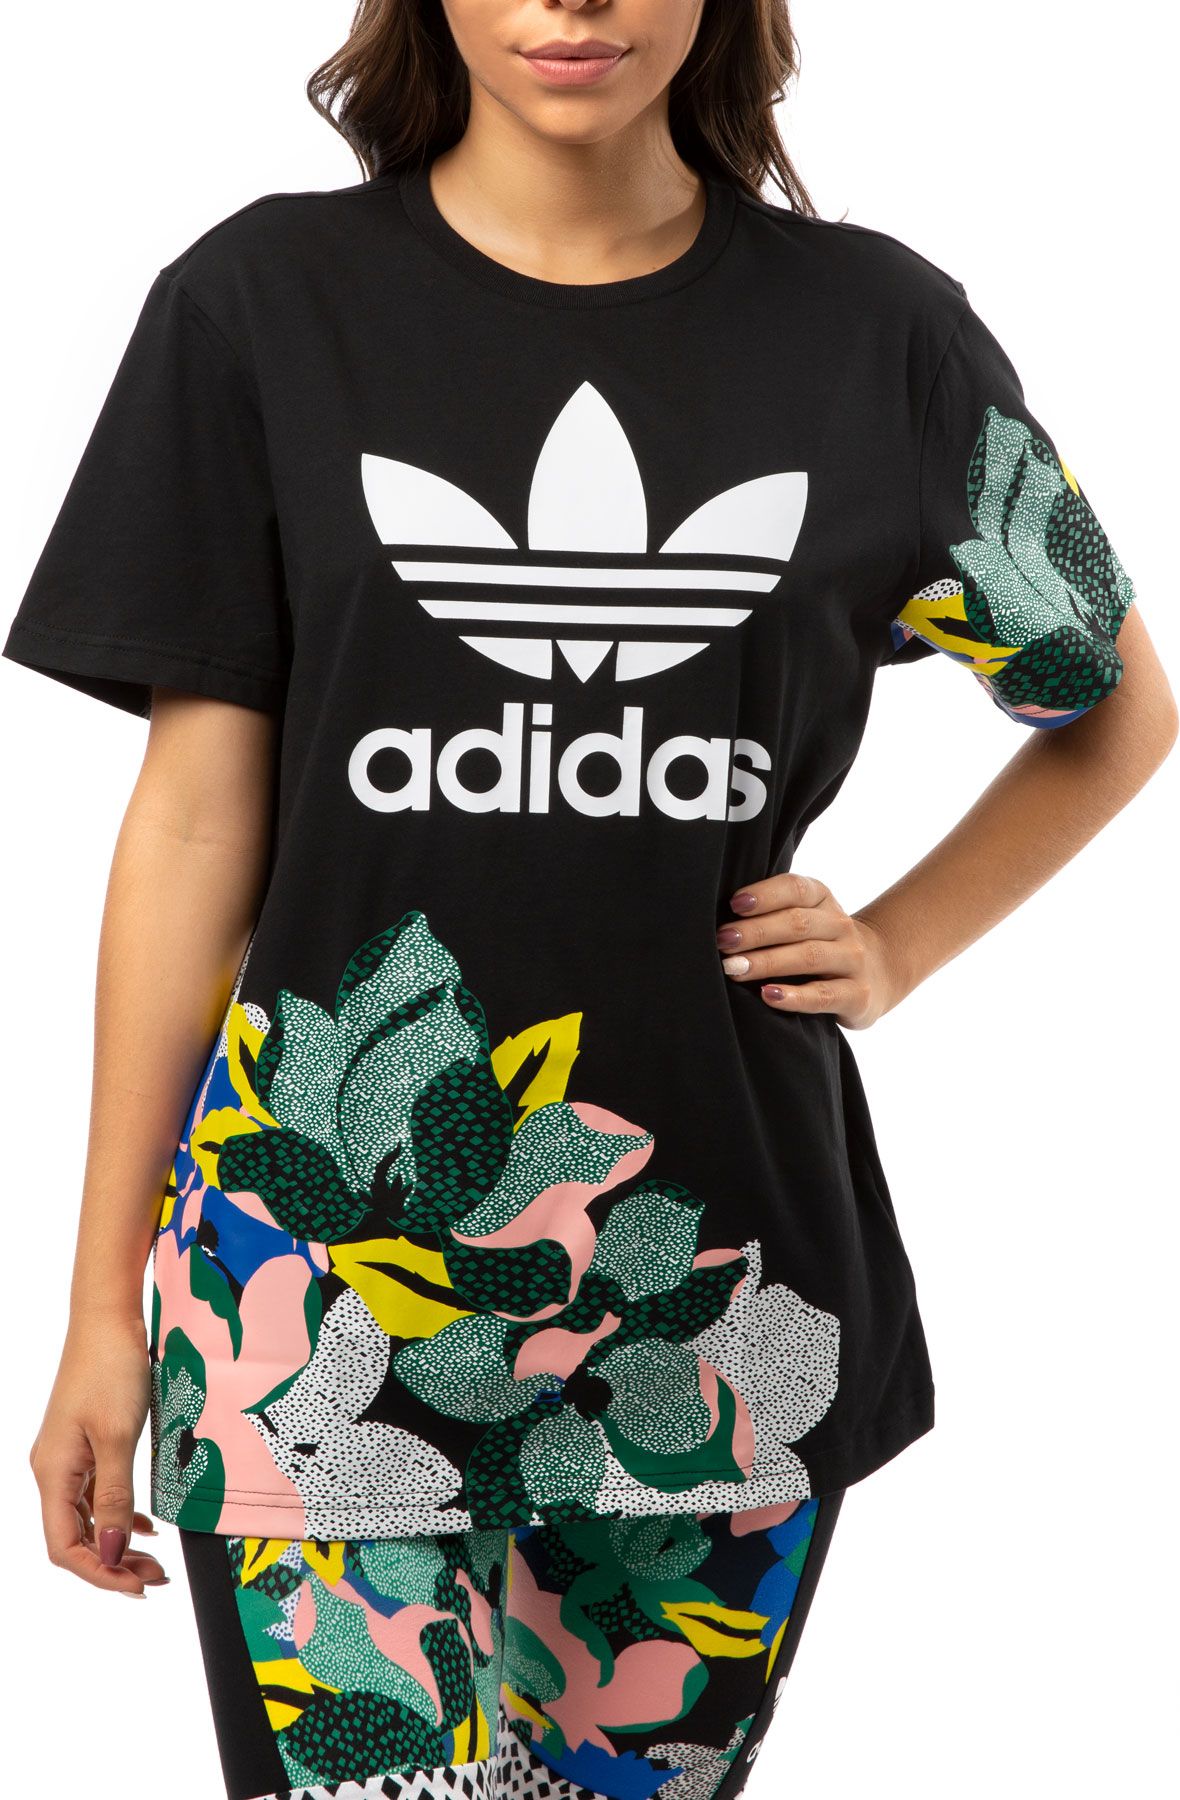 Adidas Trefoil Tee - Womens S / Orchid Fusion